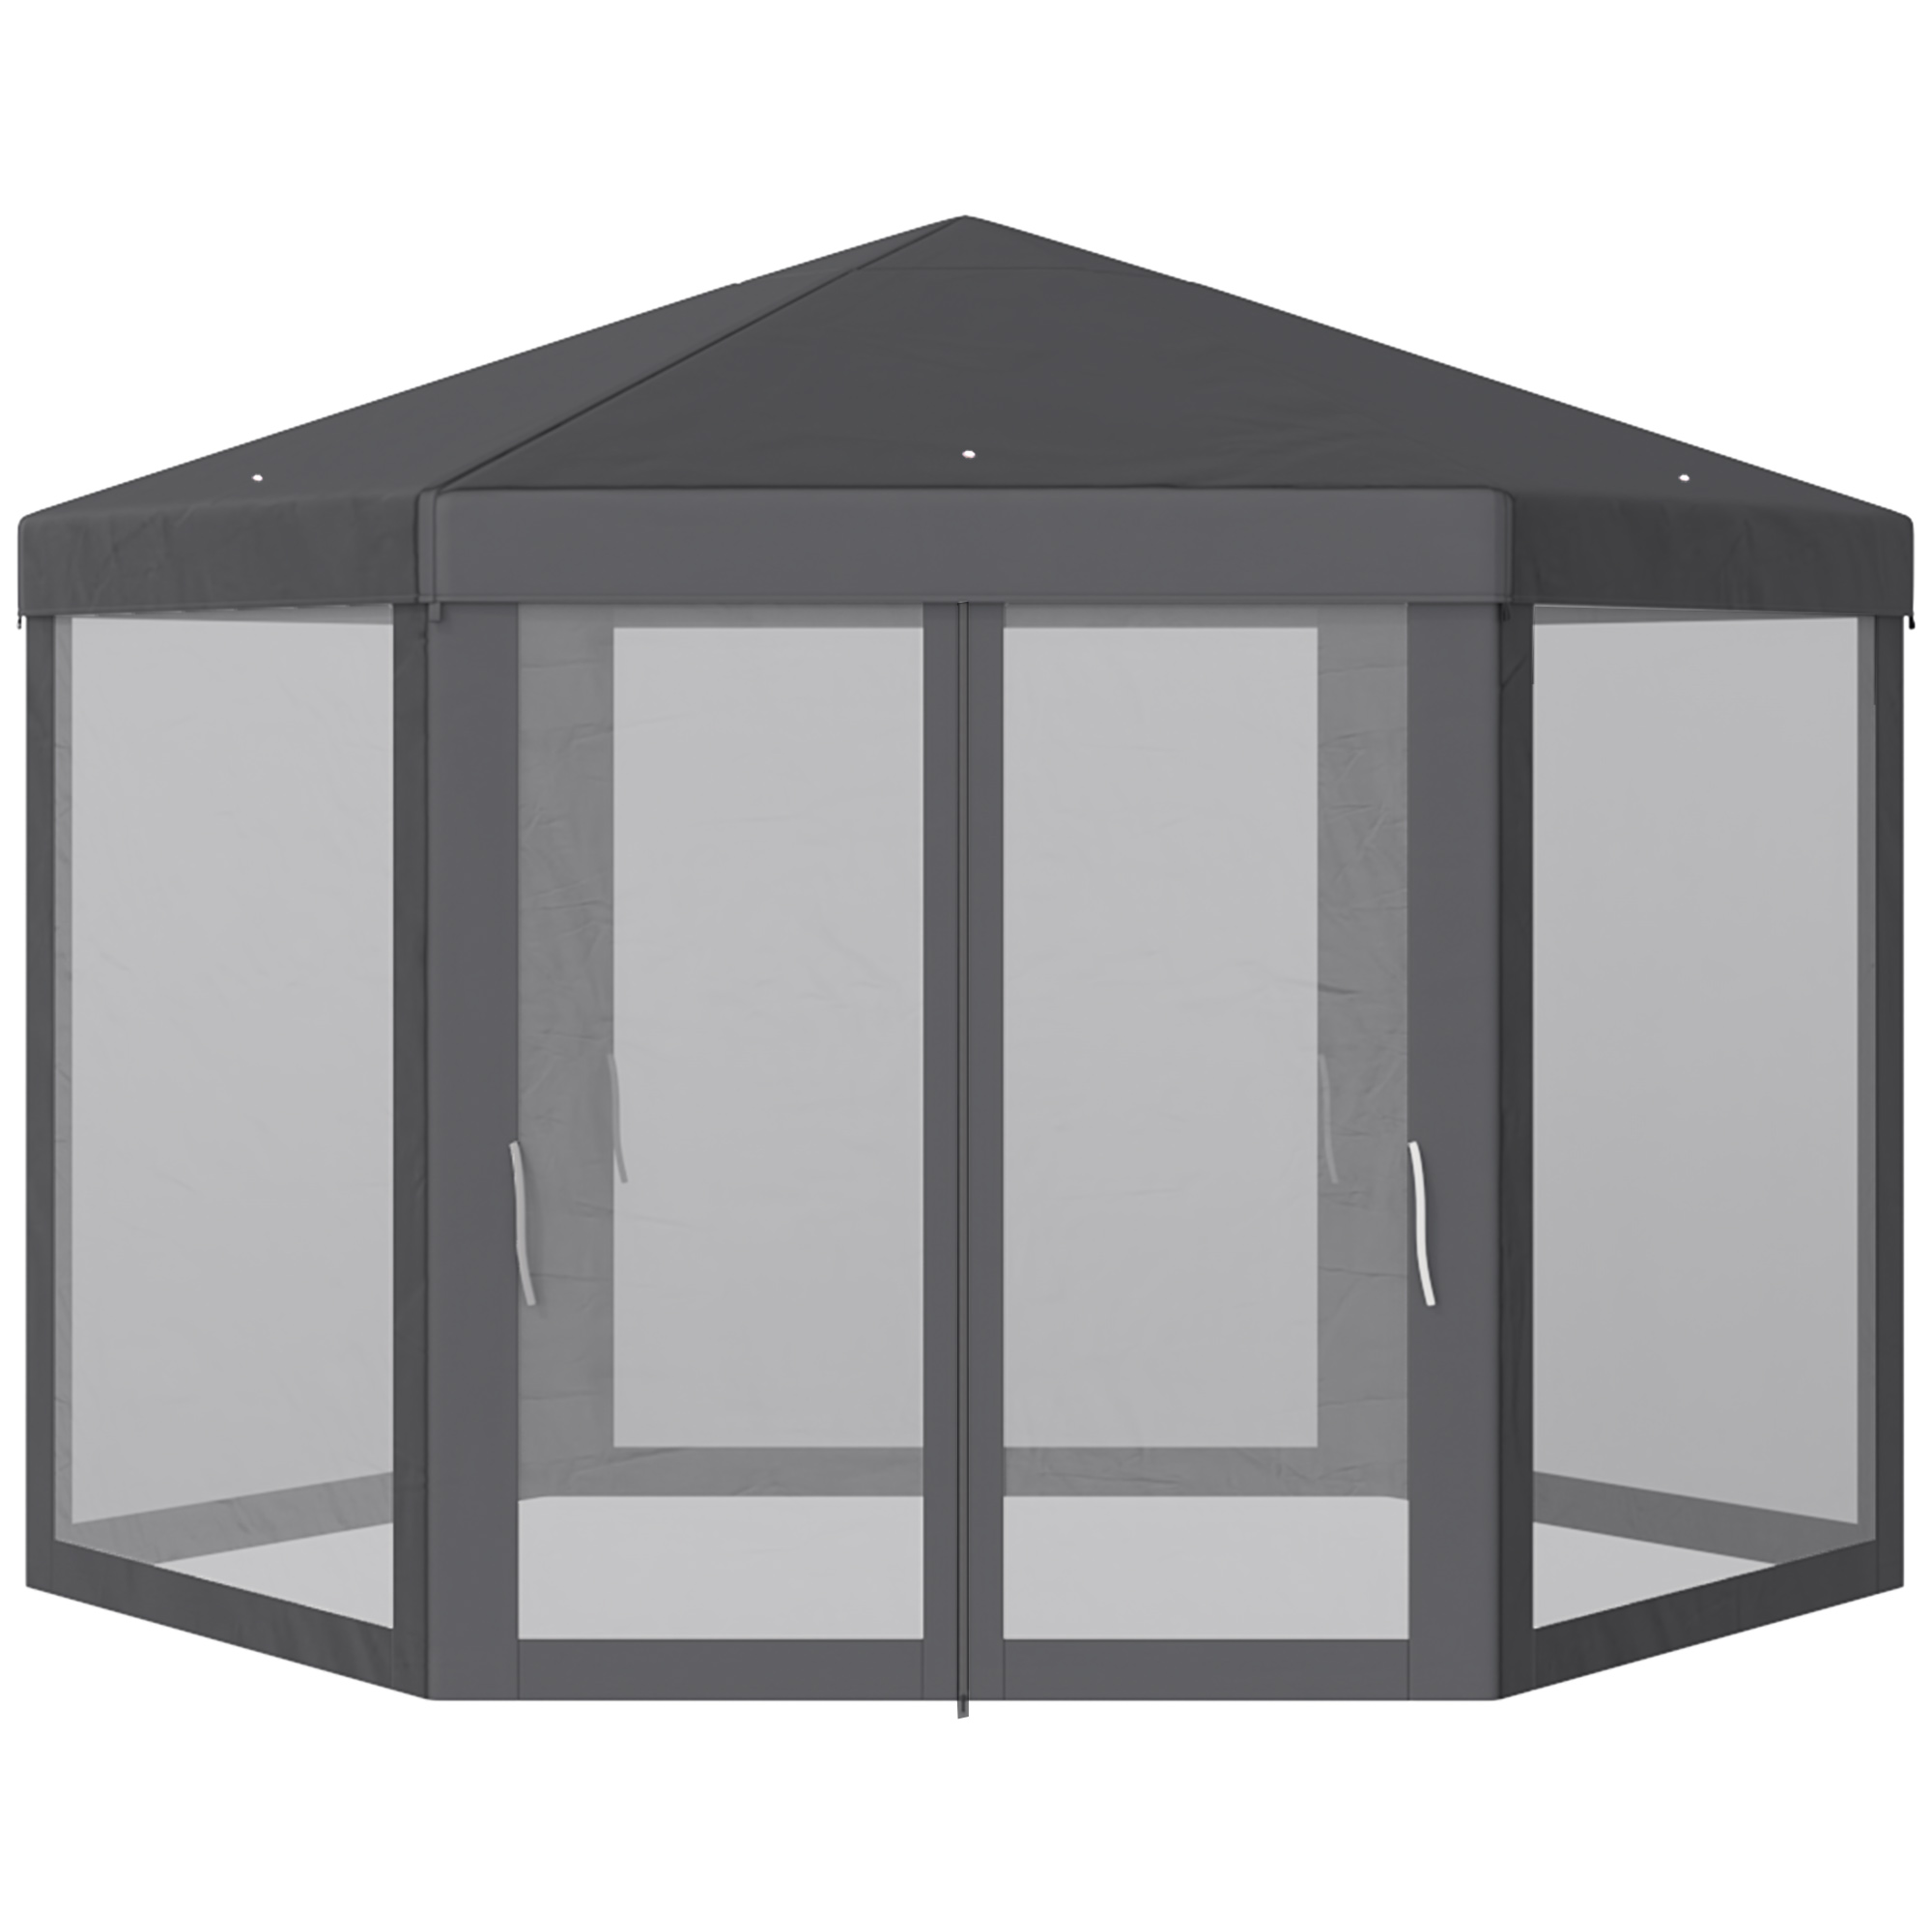 Outsunny 4m Canopy Rentals, Netting Party Tent Patio Canopy Outdoor Event Shelter For Activities, Shade Resistant, Grey